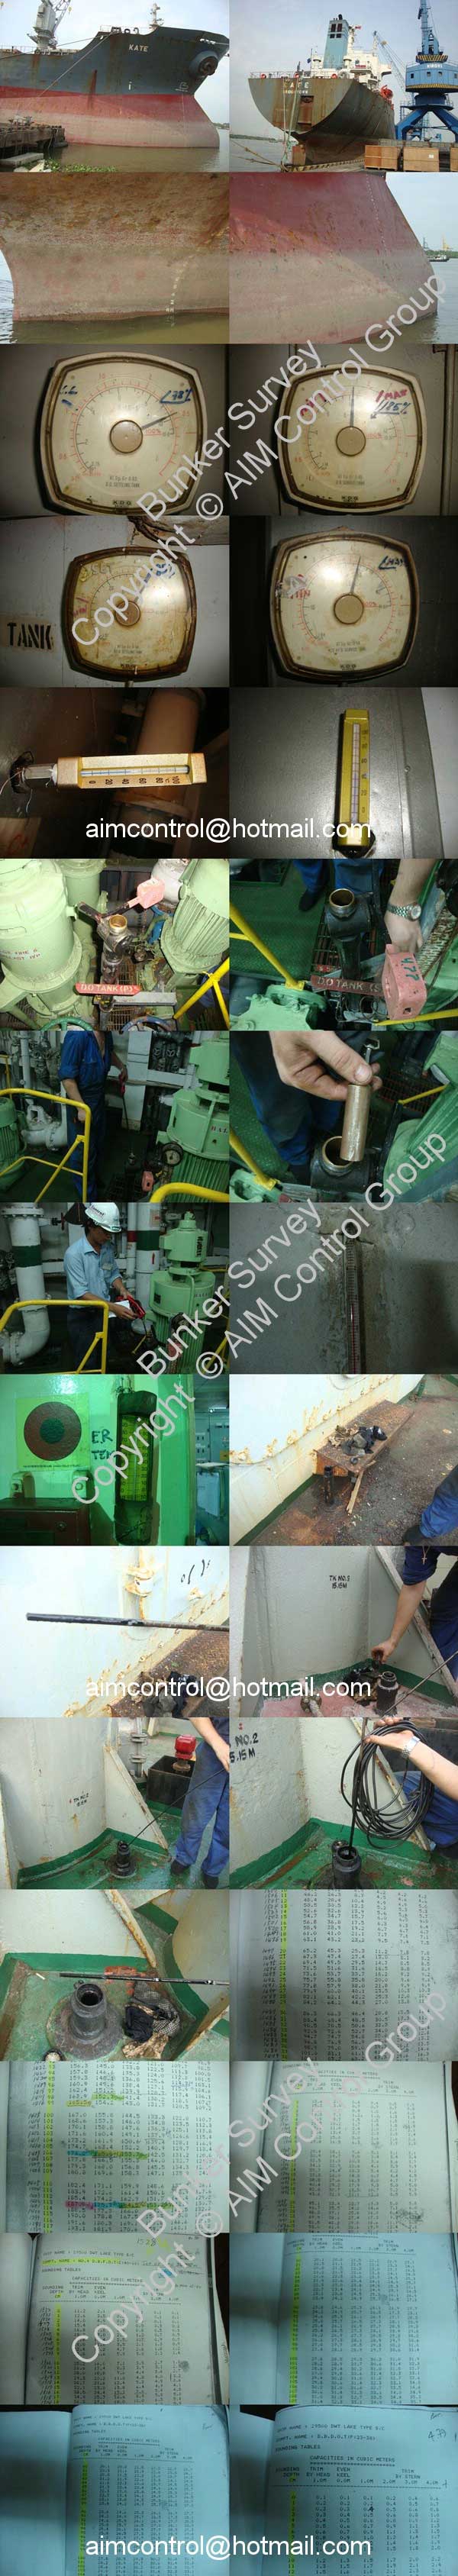 Remaining_bunker_survey_of_marine_ship_Bunkering_services_for_ship_vessel_AIM_Control